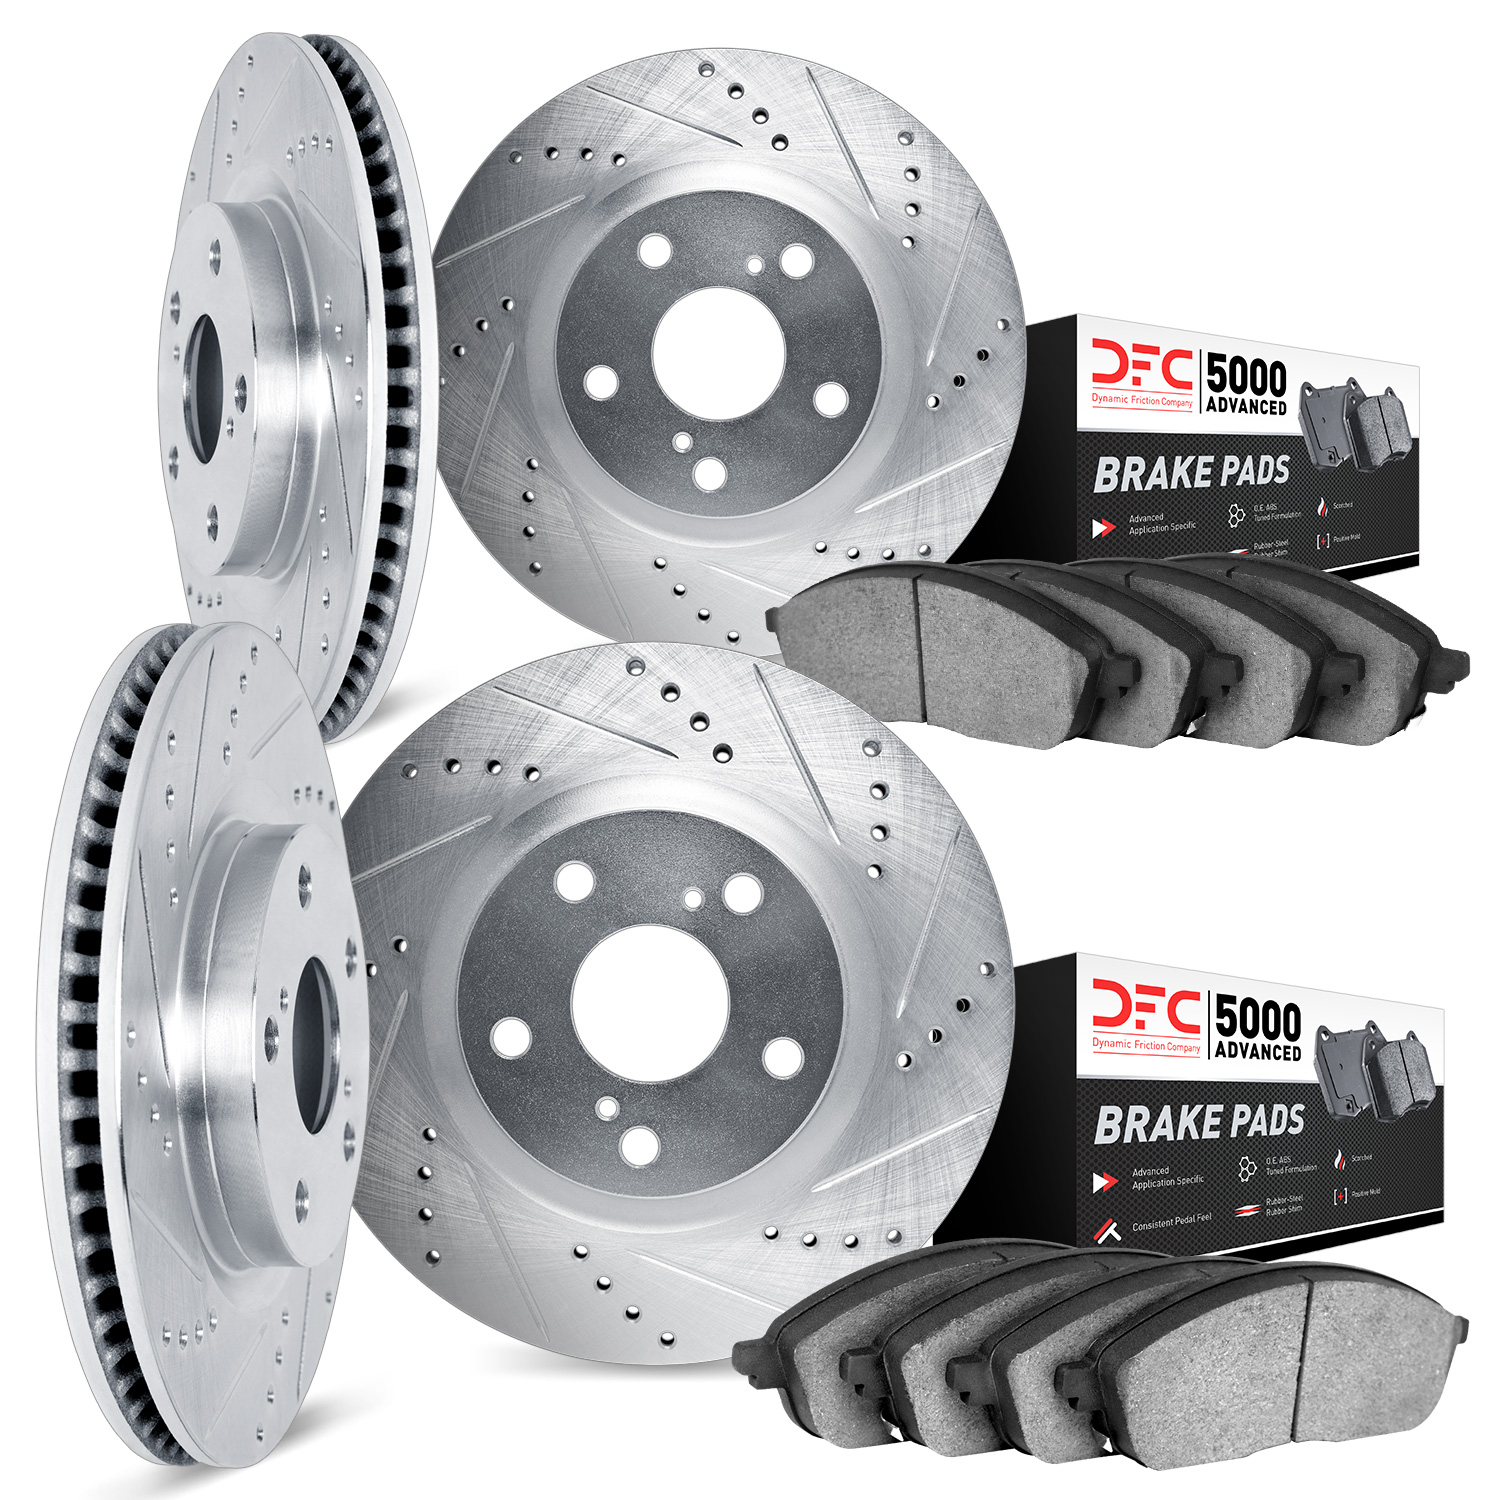 7504-74084 Drilled/Slotted Brake Rotors w/5000 Advanced Brake Pads Kit [Silver], 2003-2015 Multiple Makes/Models, Position: Fron